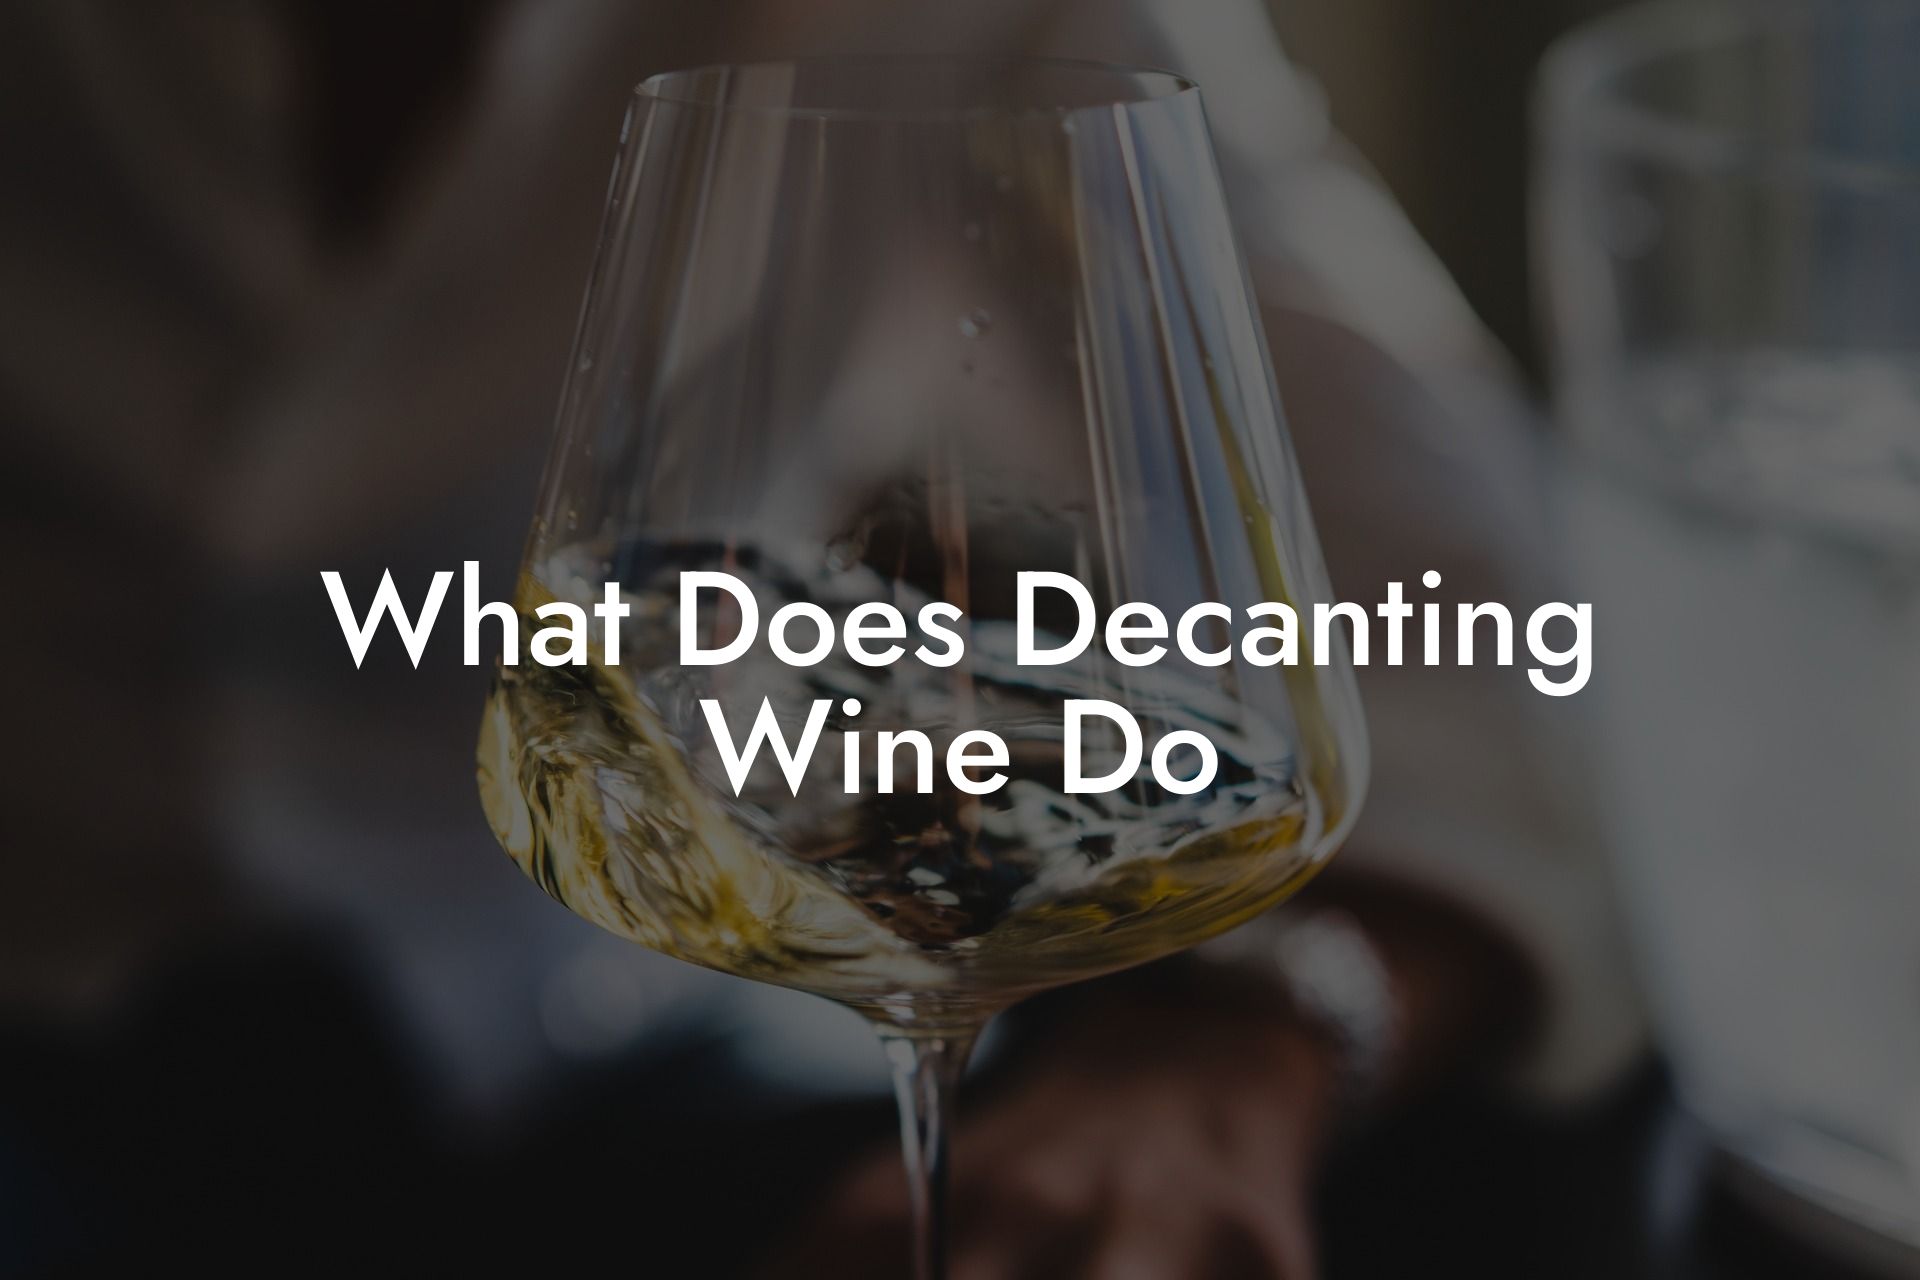 What Does Decanting Wine Do